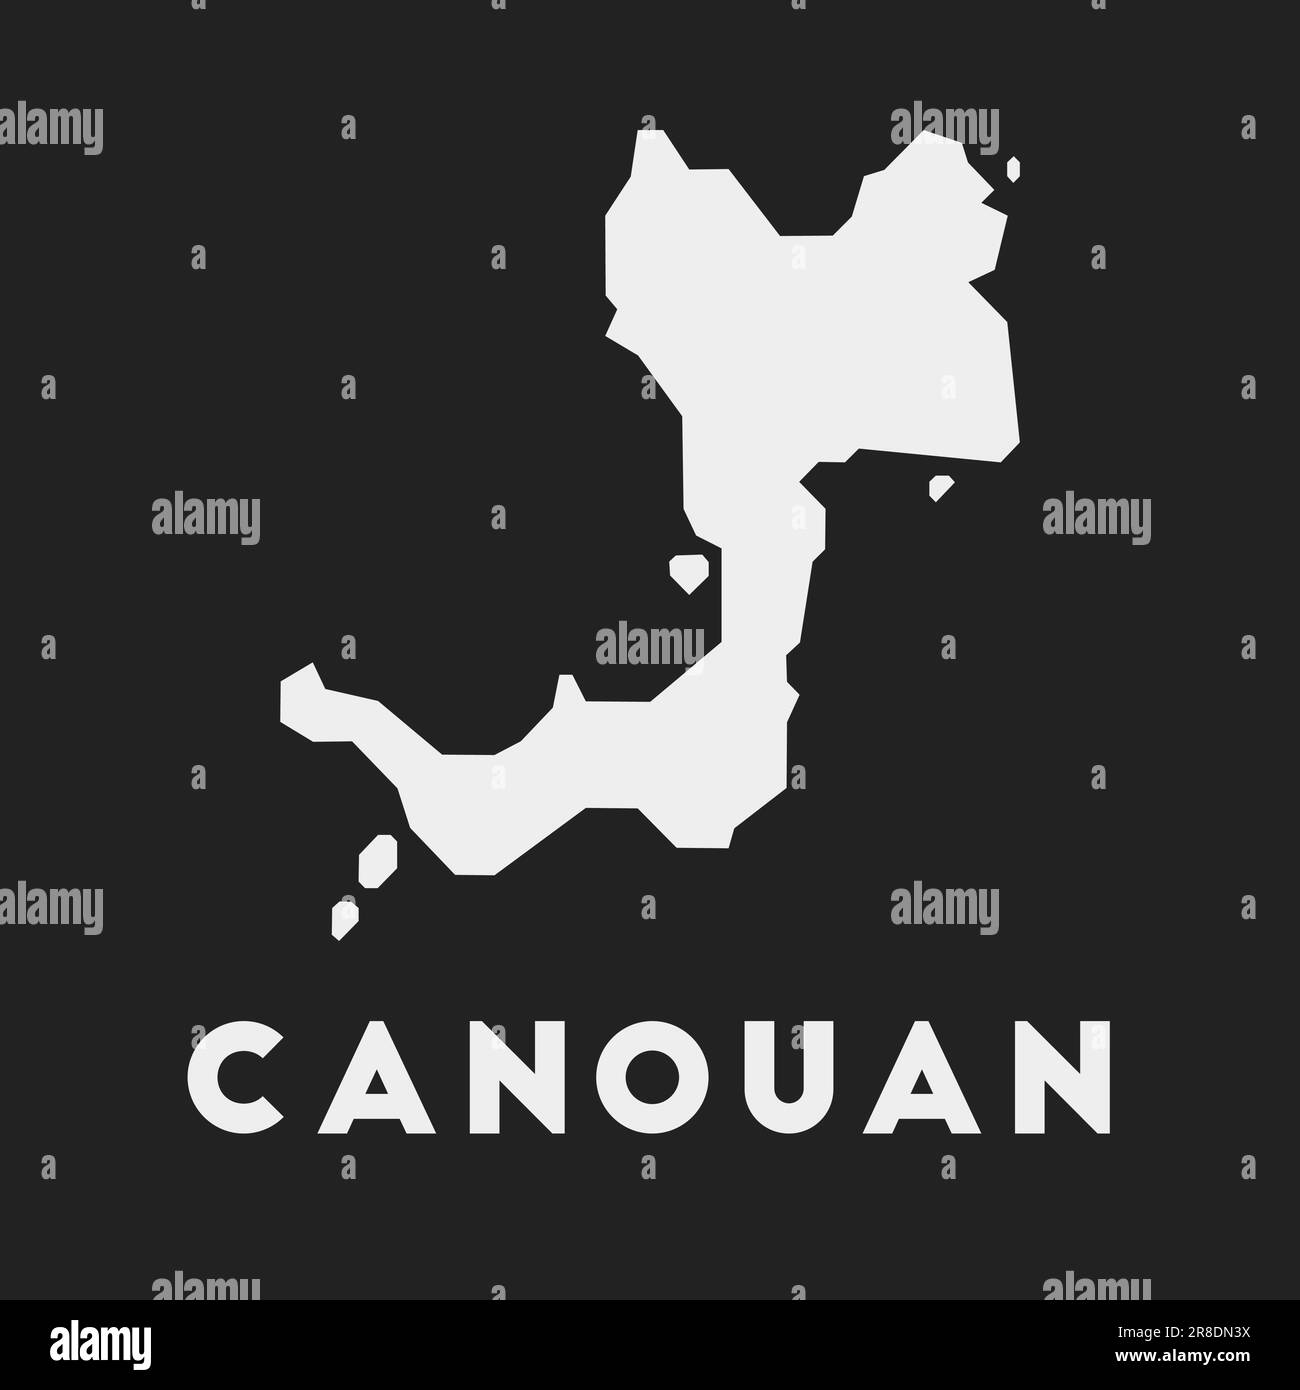 Canouan icon. Island map on dark background. Stylish Canouan map with ...